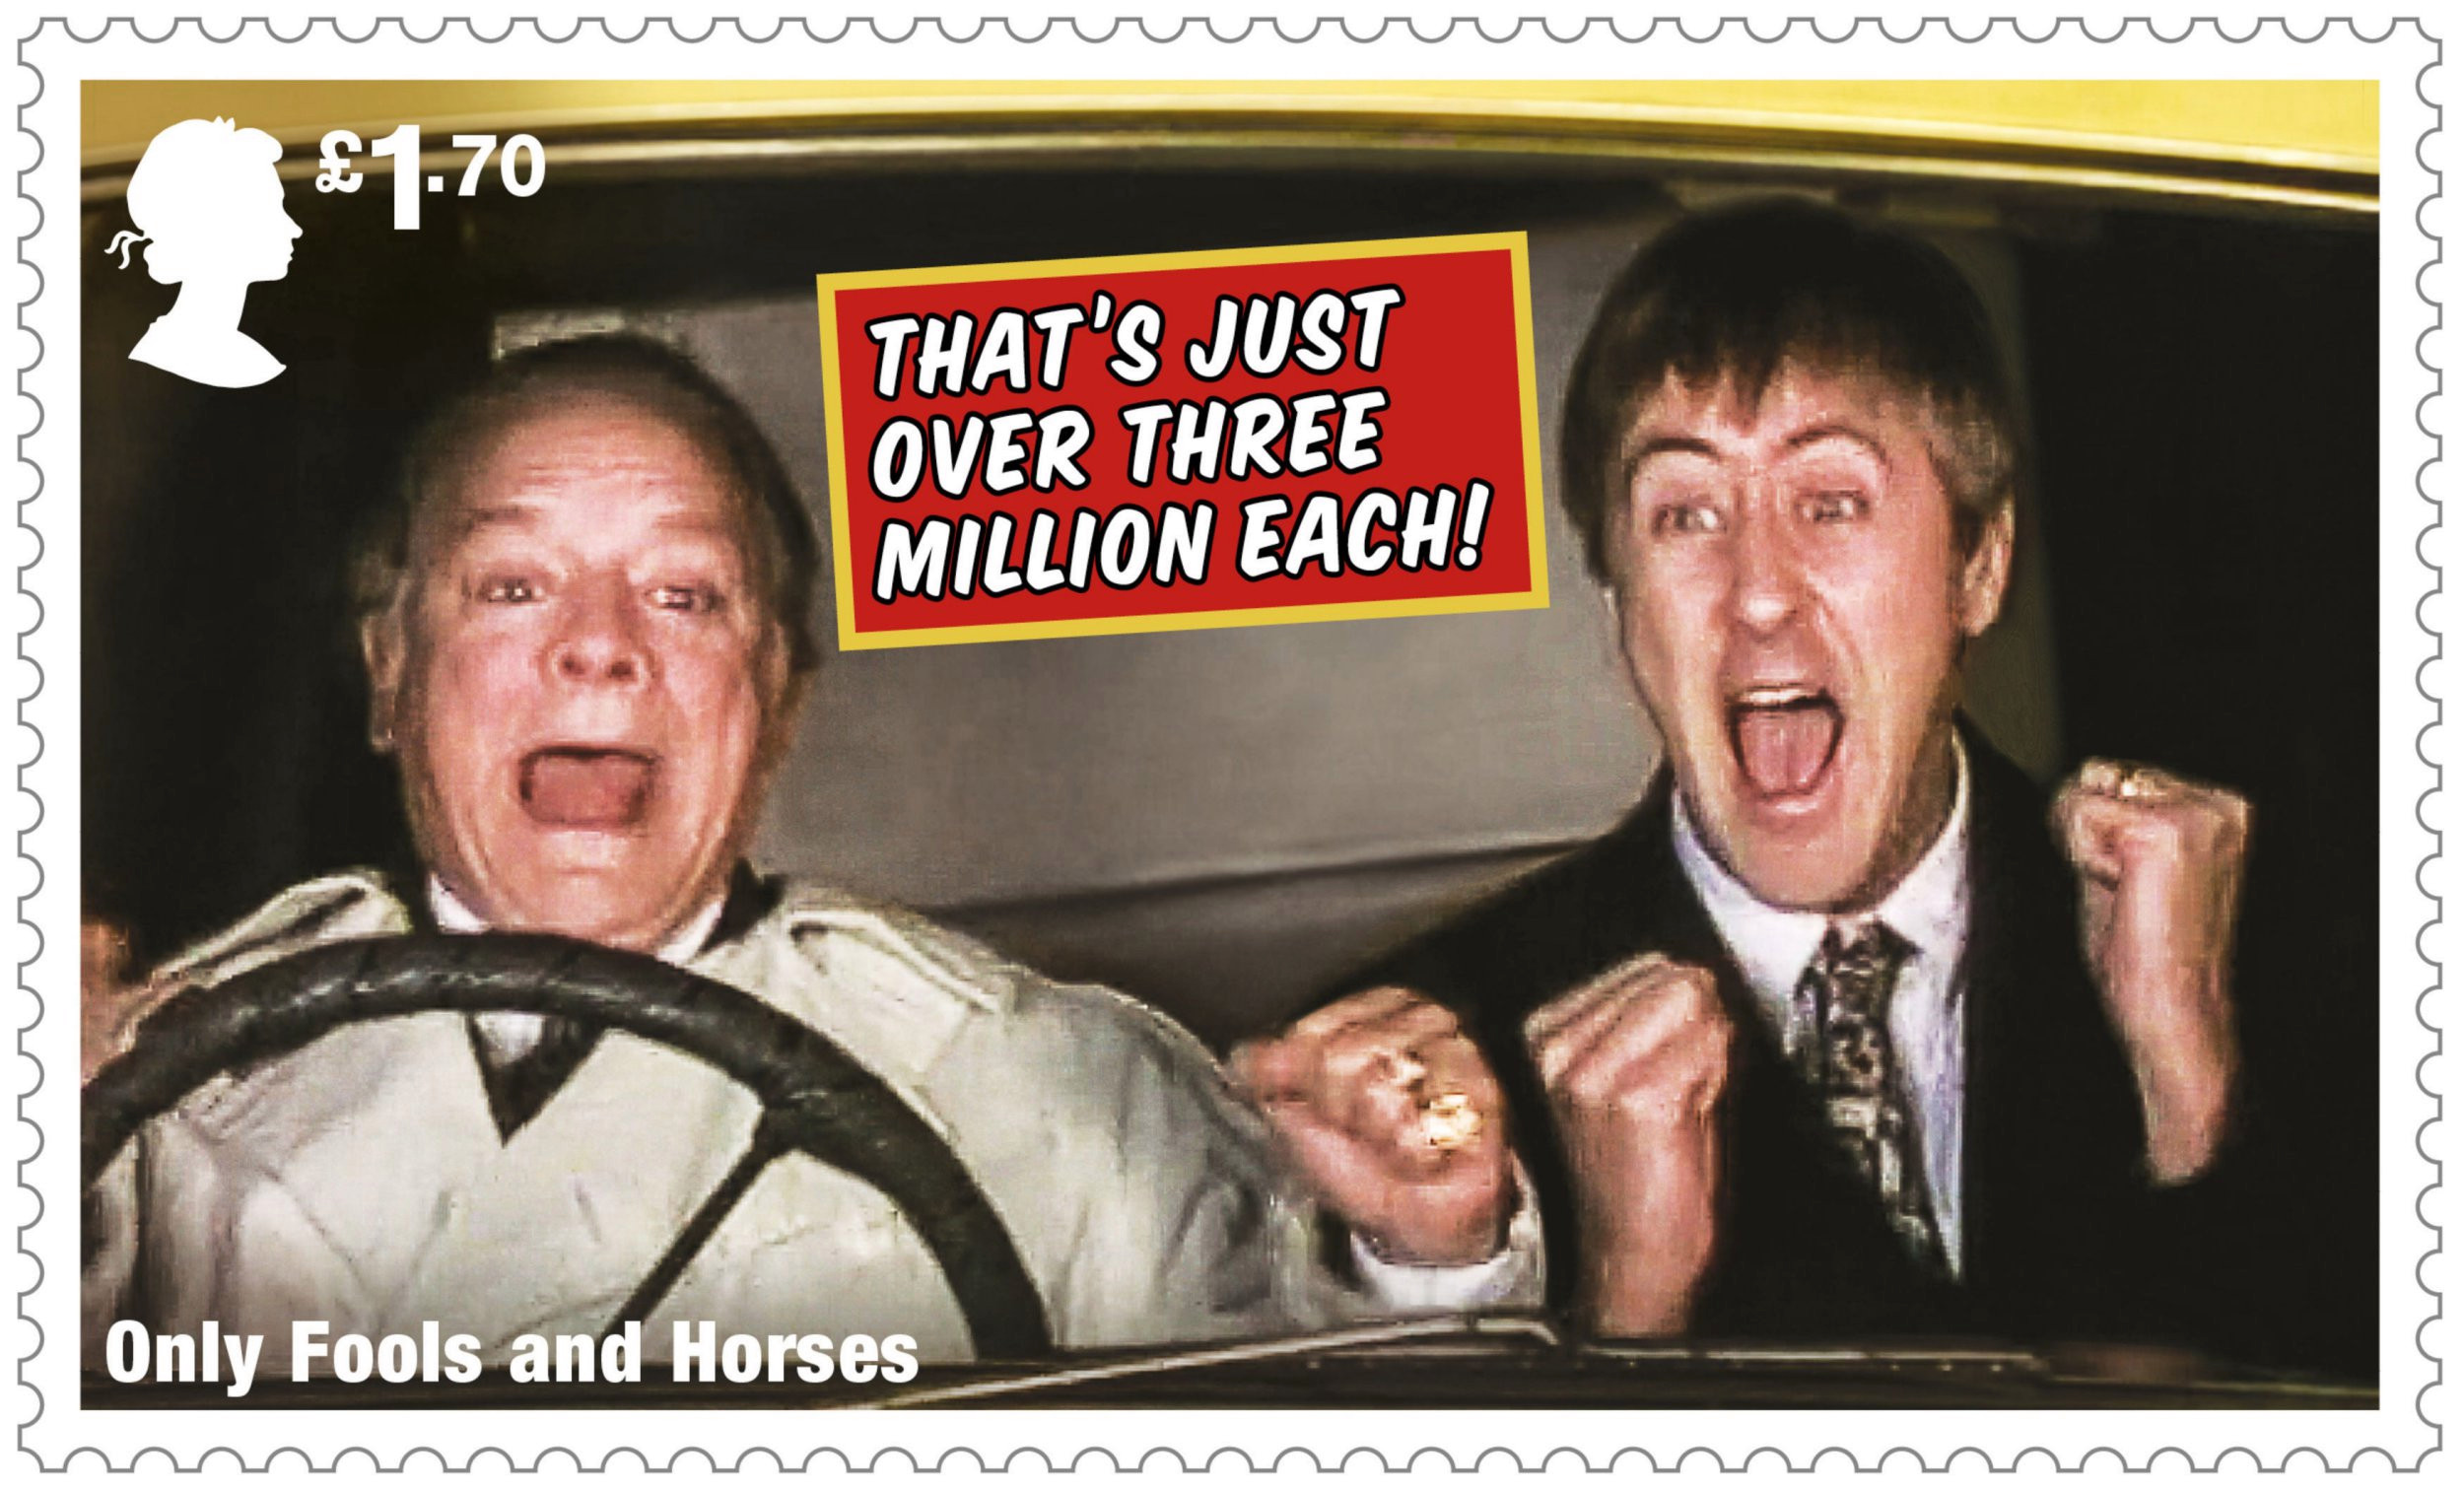 Where to buy the Only Fools and Horses commemorative stamps